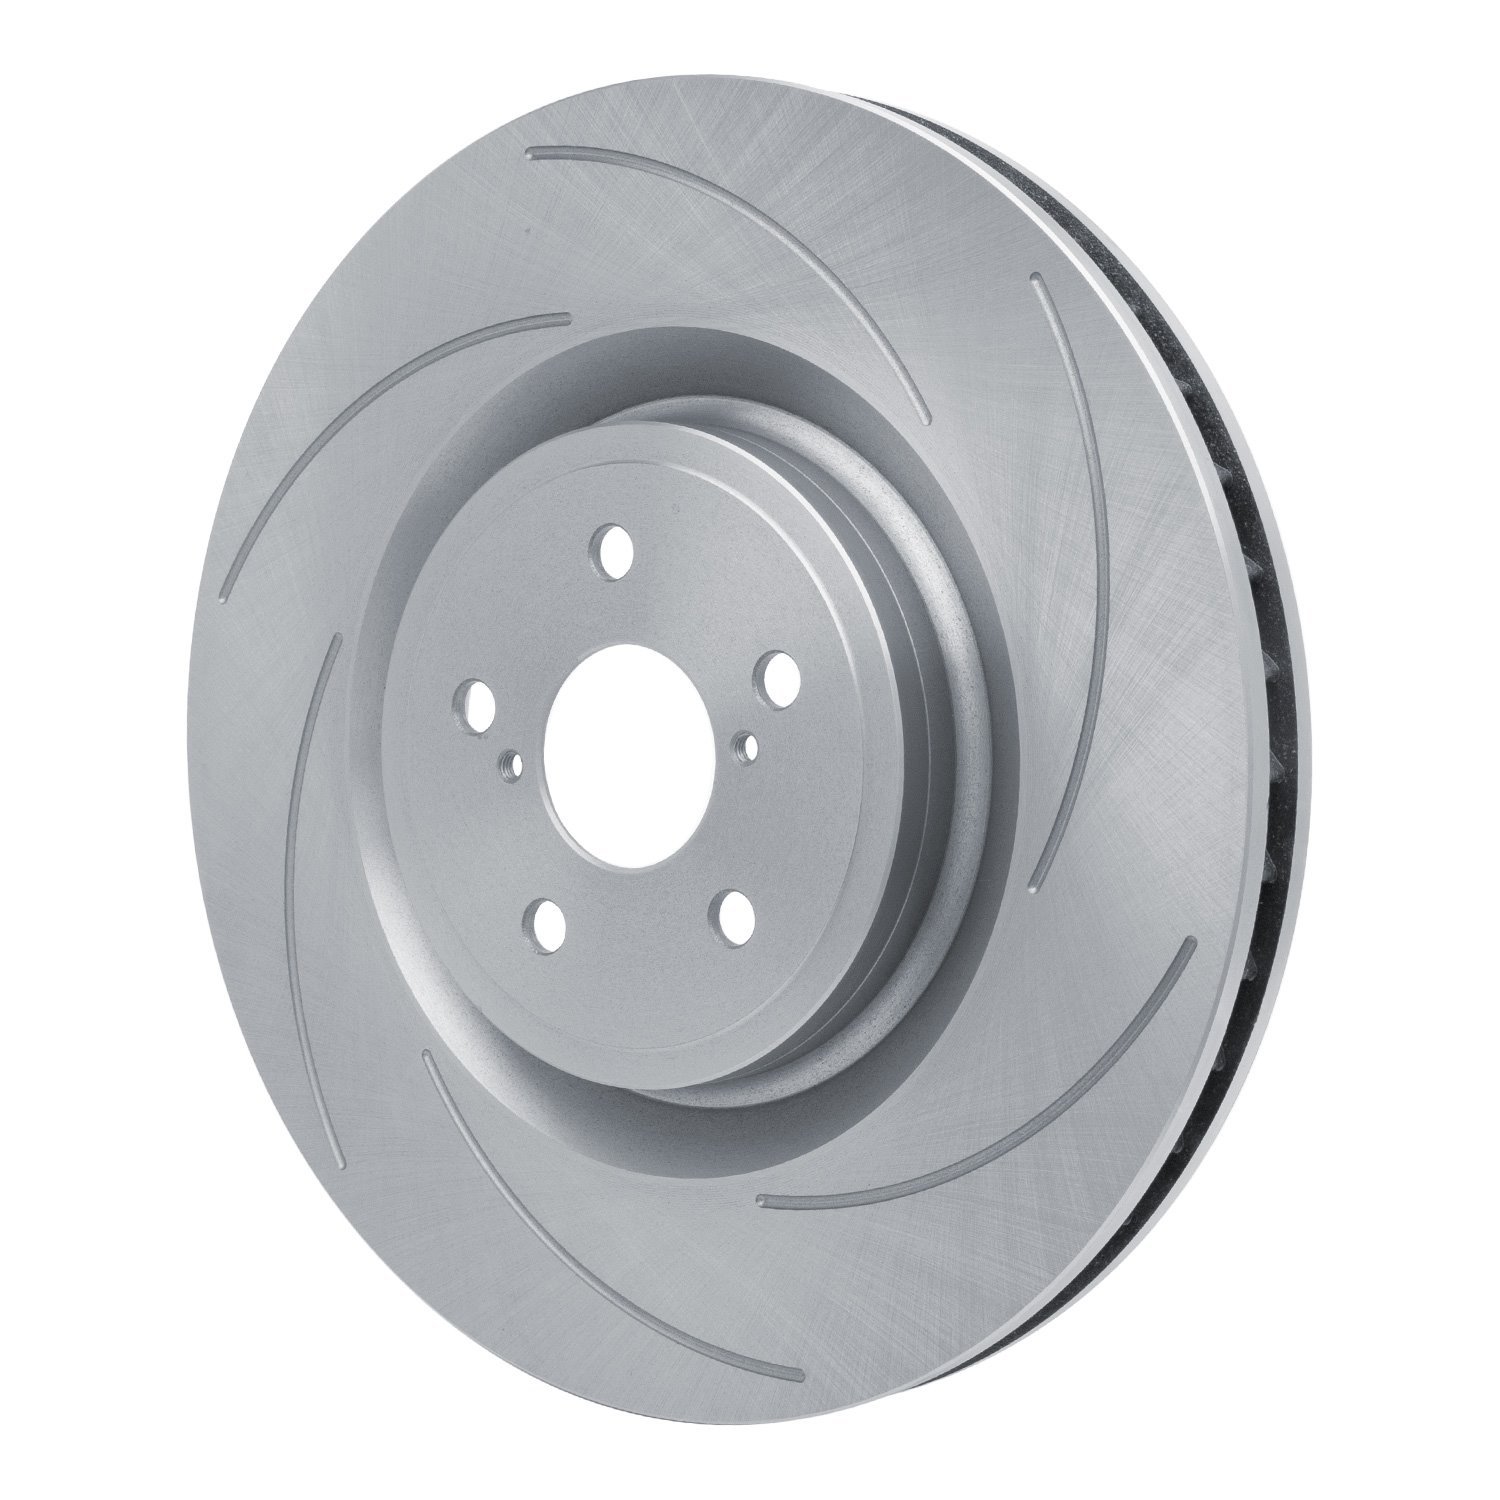 Slotted Brake Rotor, Fits Select Lexus/Toyota/Scion